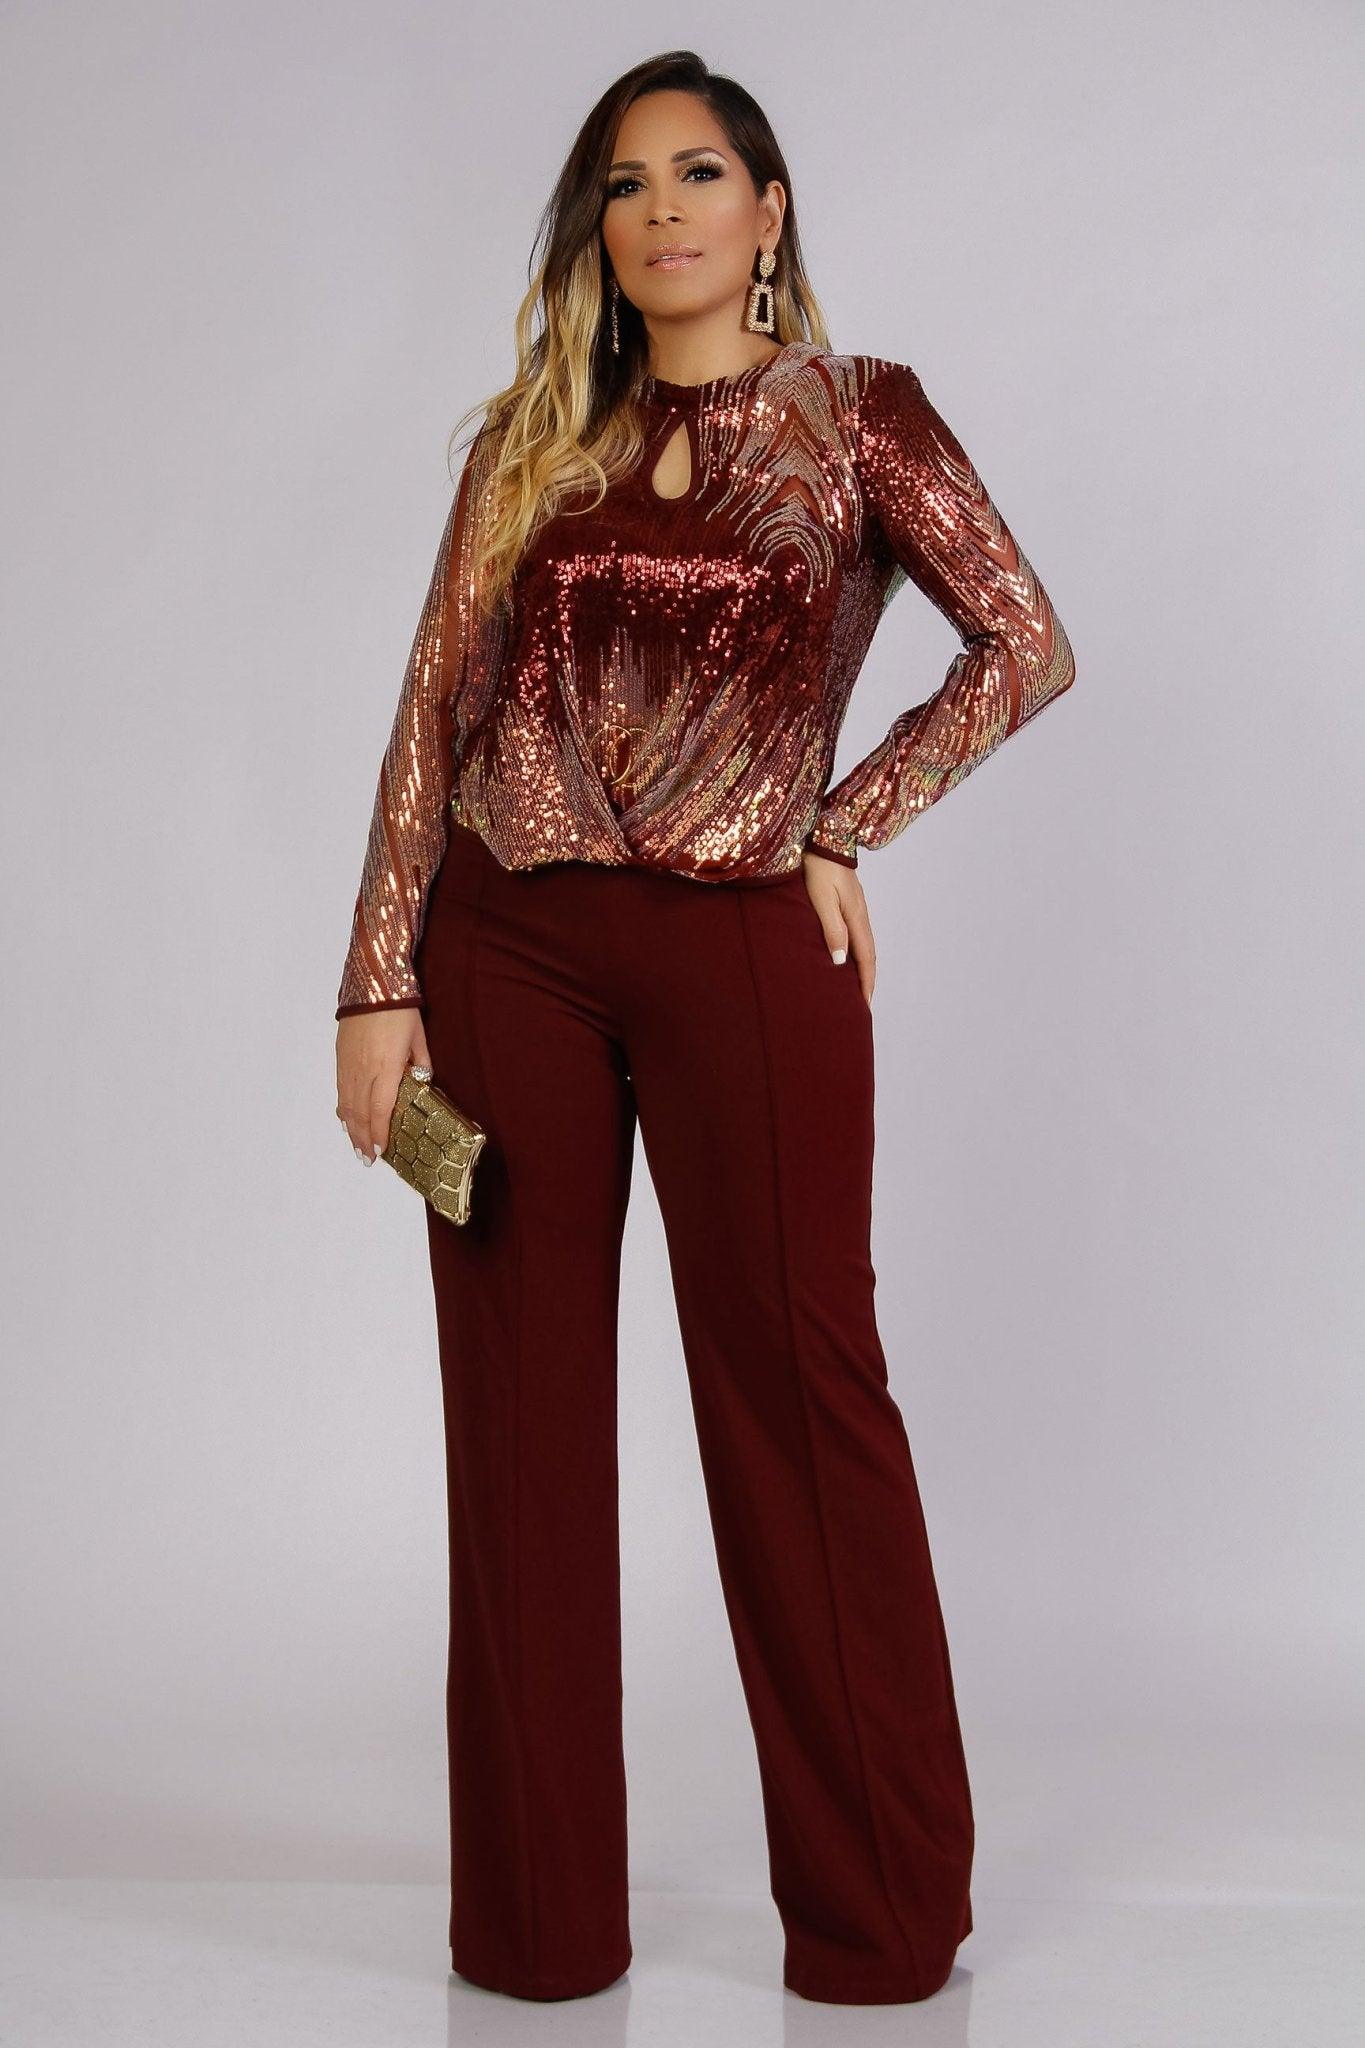 Whitney Elegant Keyhole Sequin Blouse in Burgundy - MY SEXY STYLES